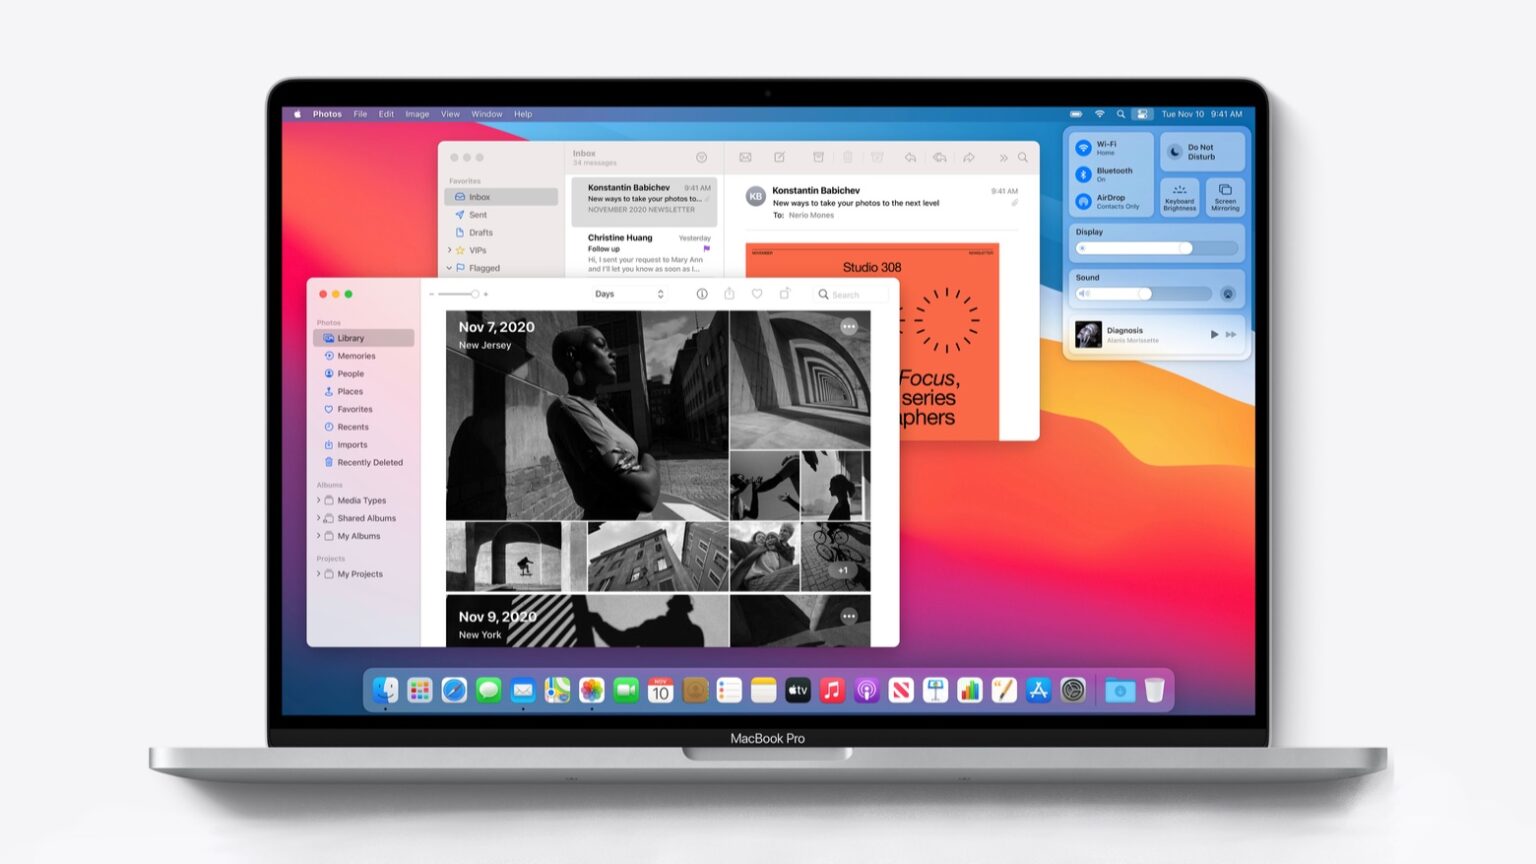 Apple rolls out new macOS Big Sur 11.0.1 update for some users